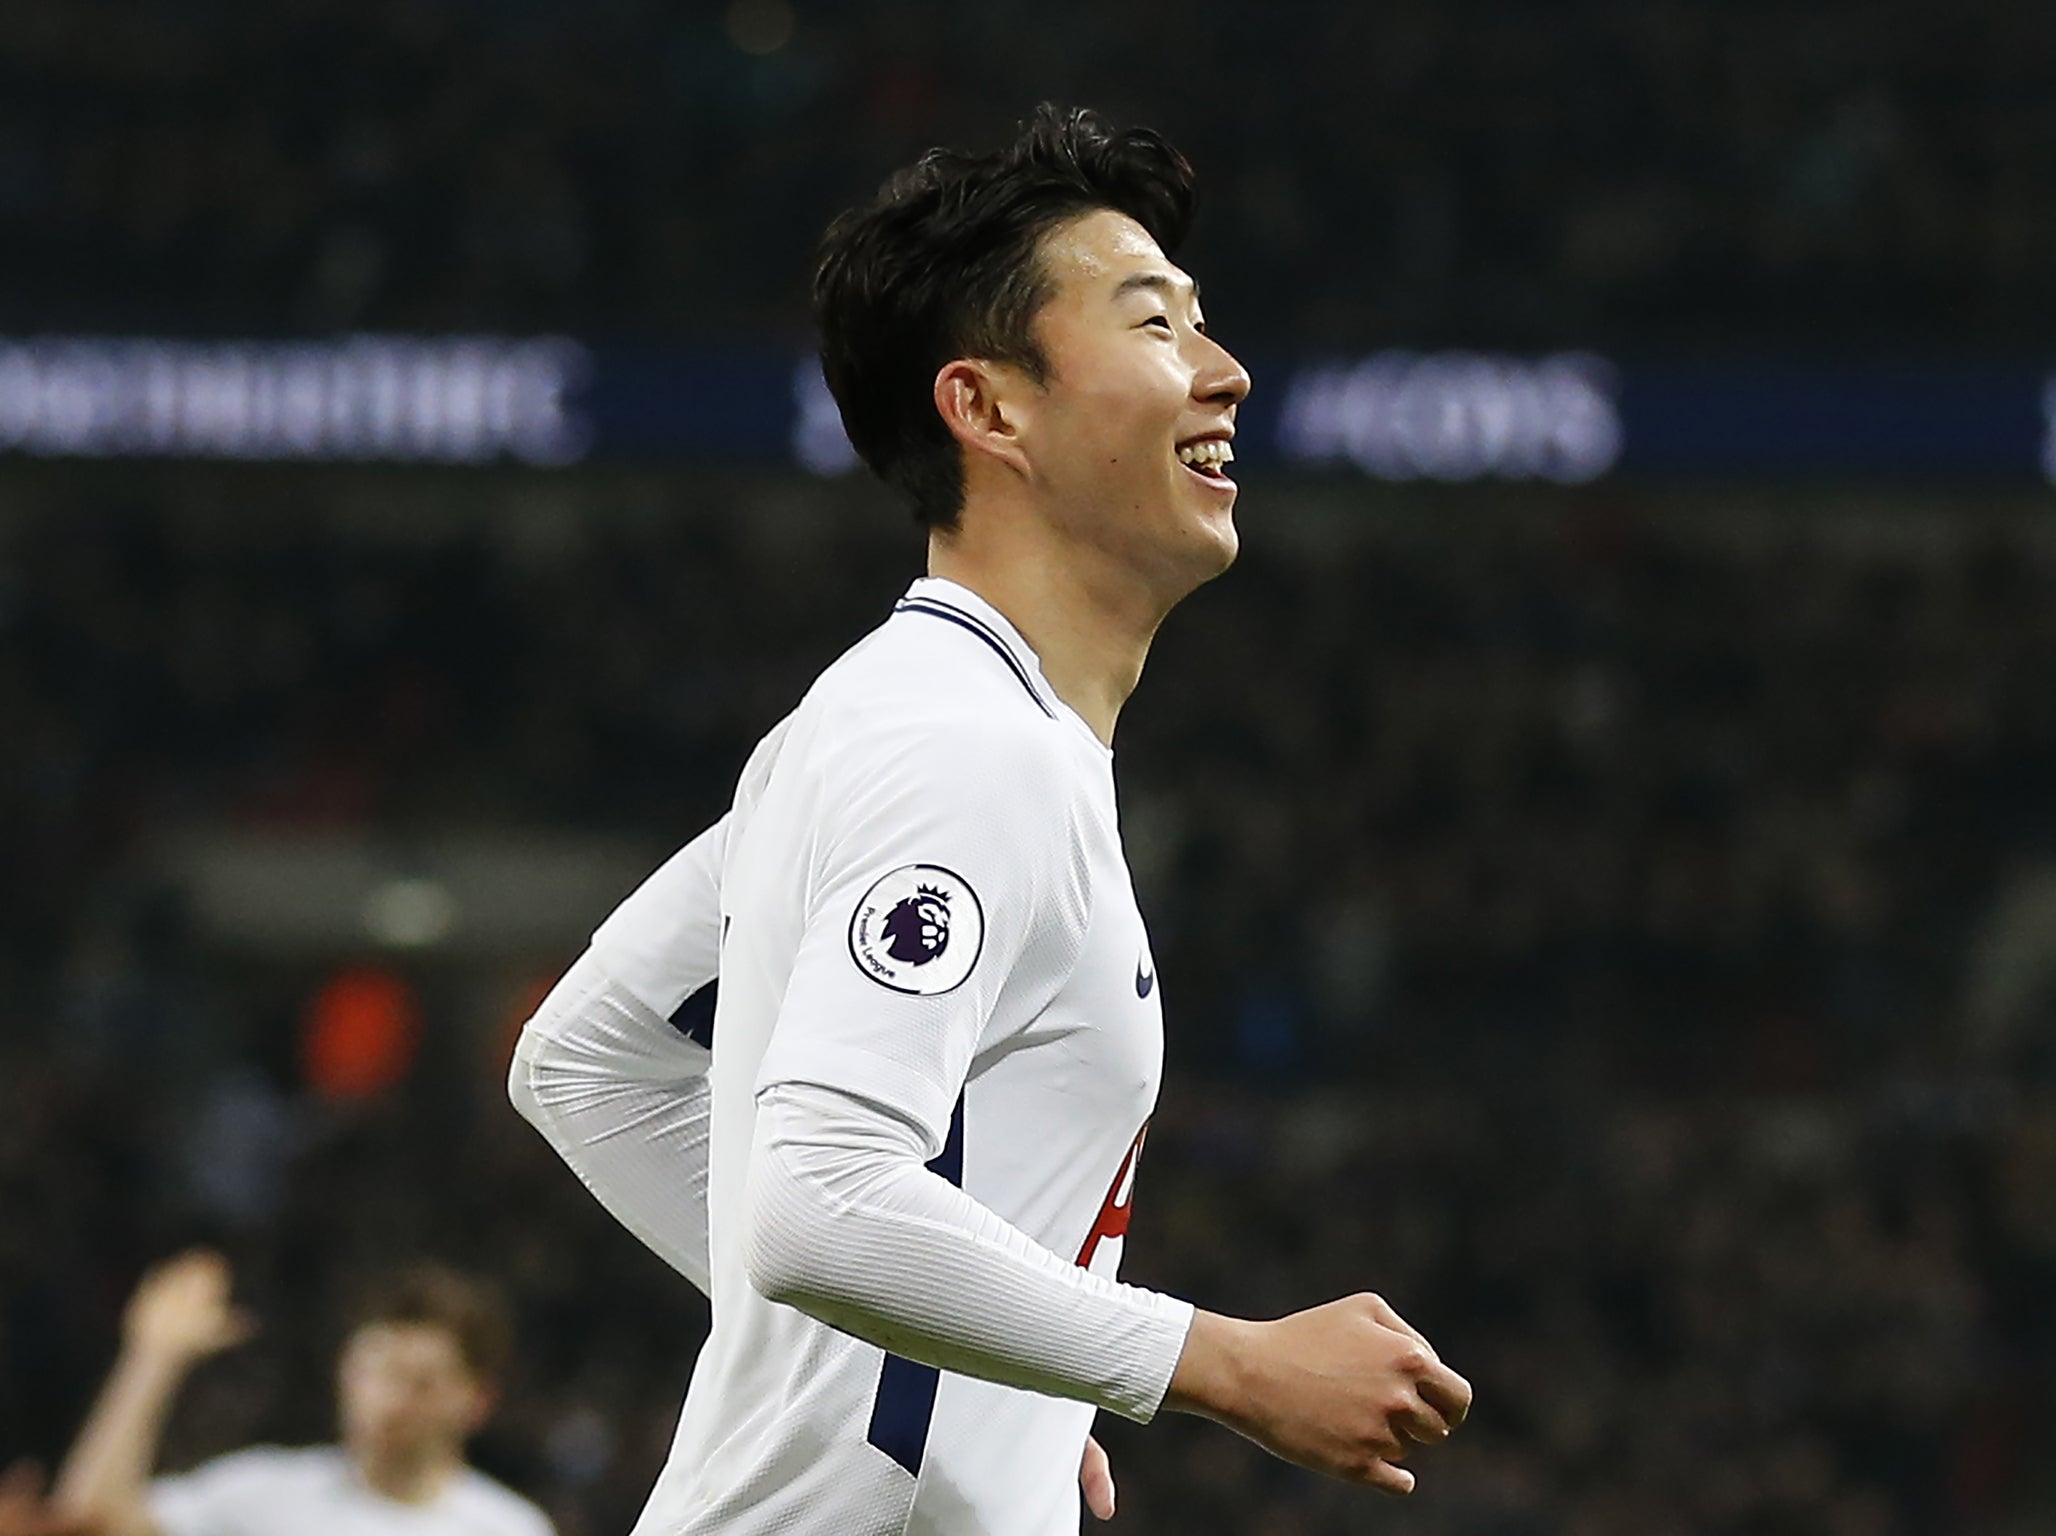 Son was in fine form for Tottenham